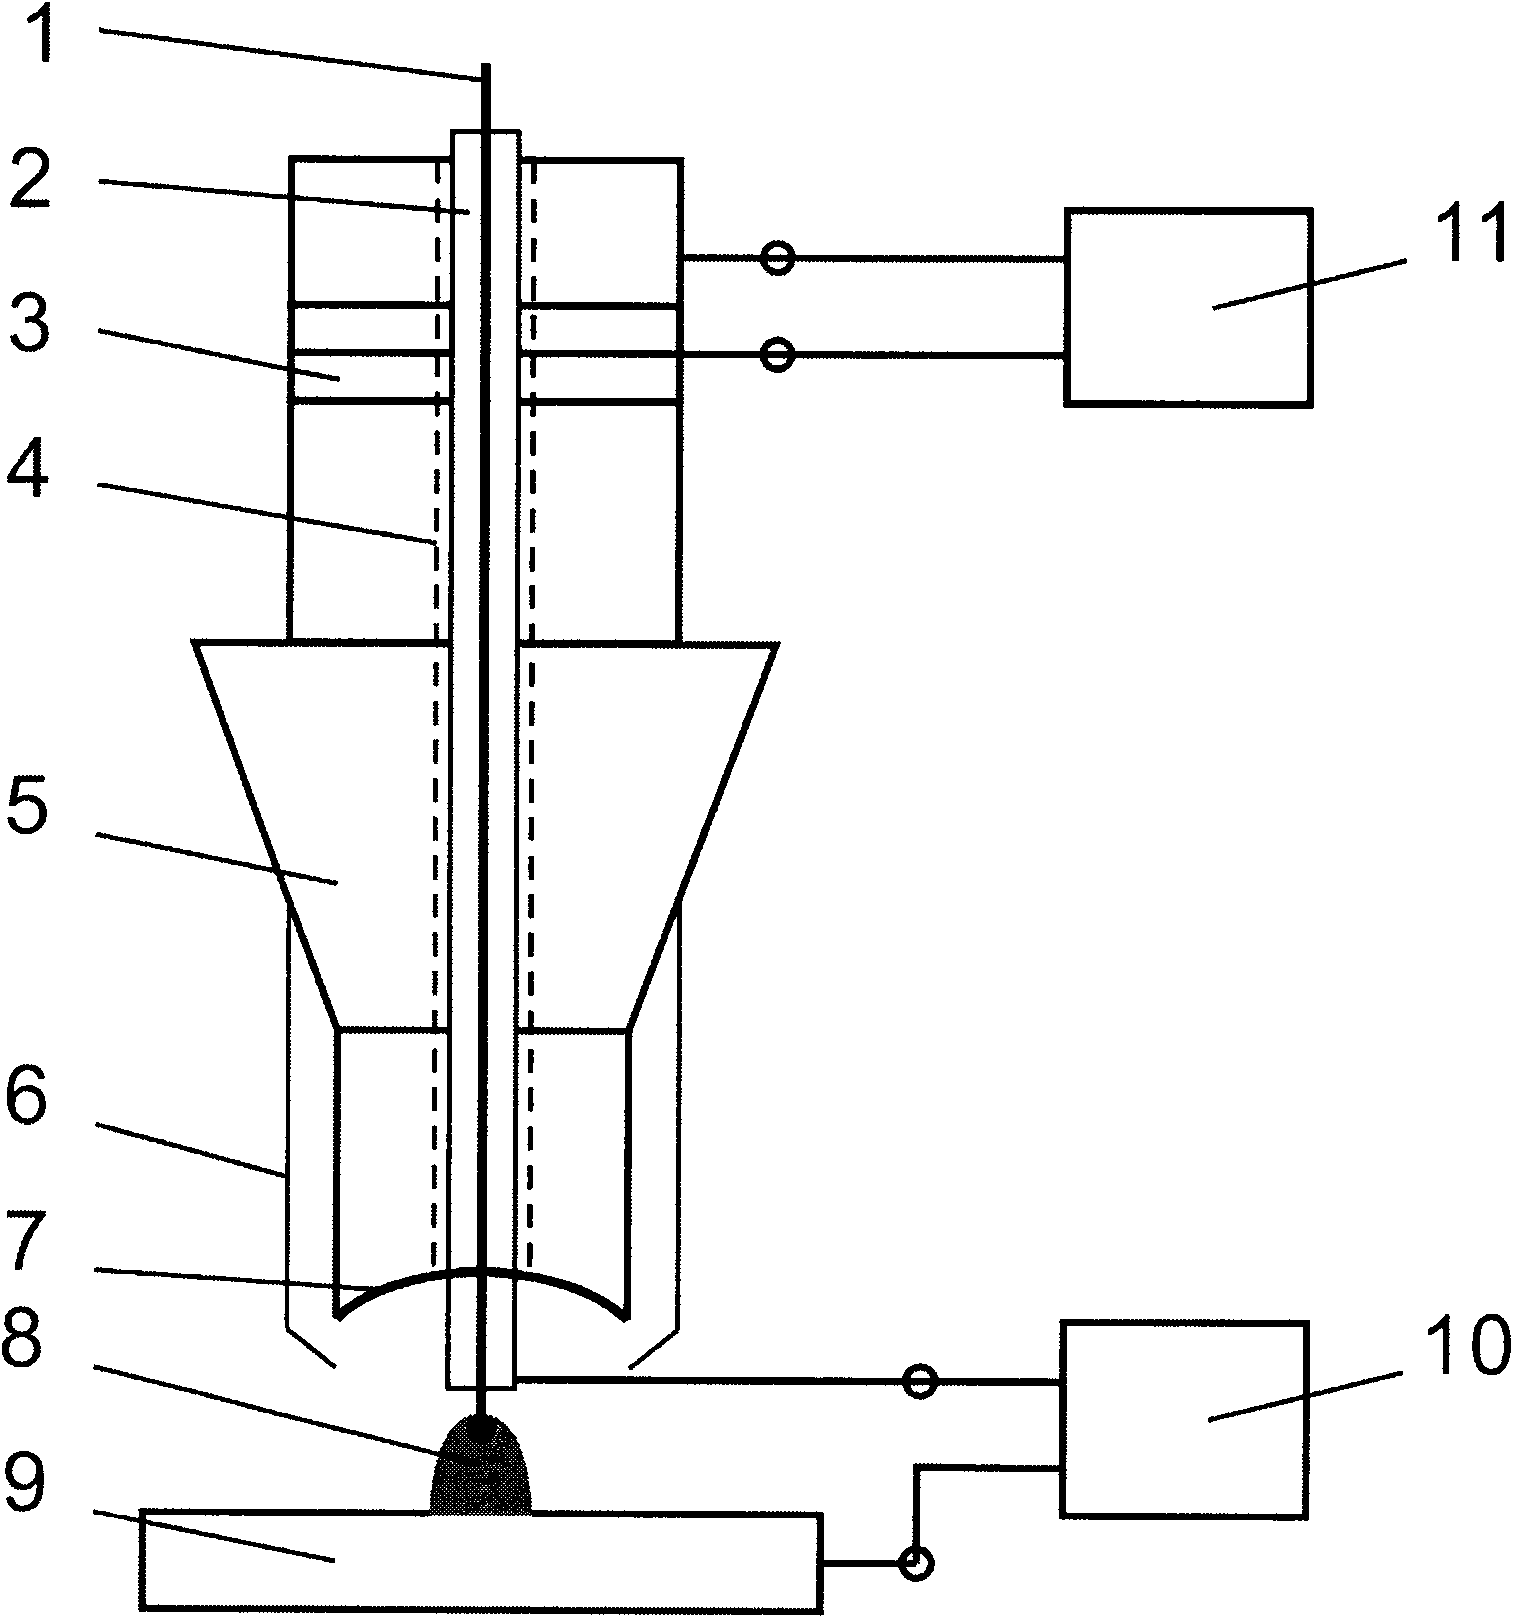 Welding device for compounding ultrasonic focusing sound field with molten pole arc welding